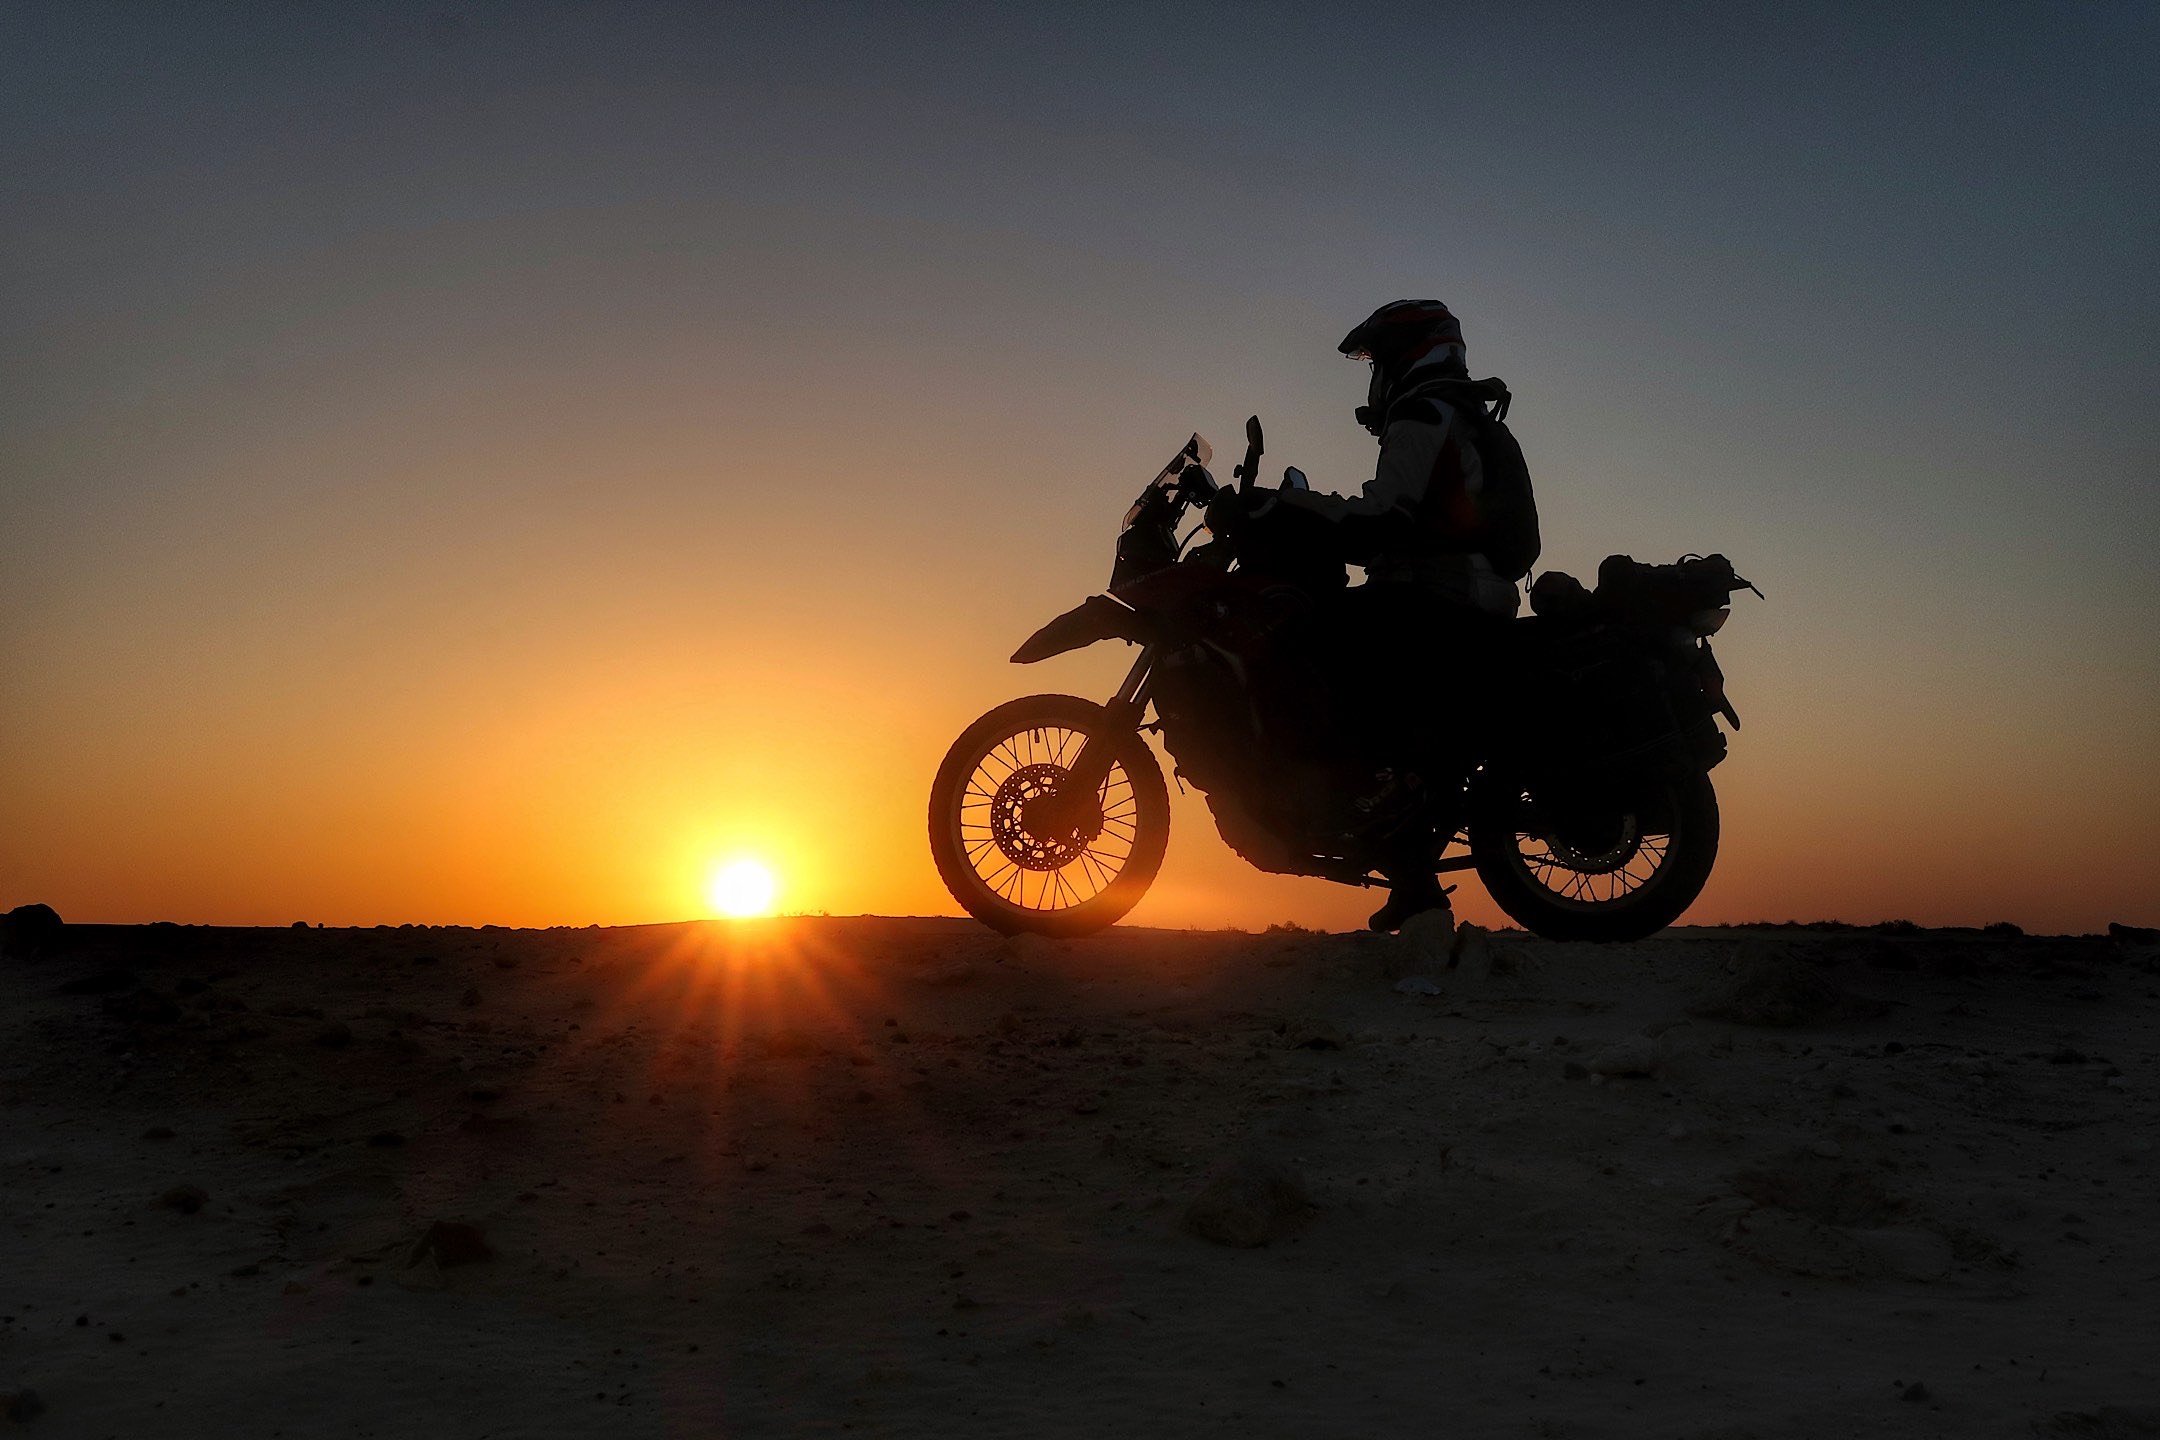  Motorcycle at sunset. 